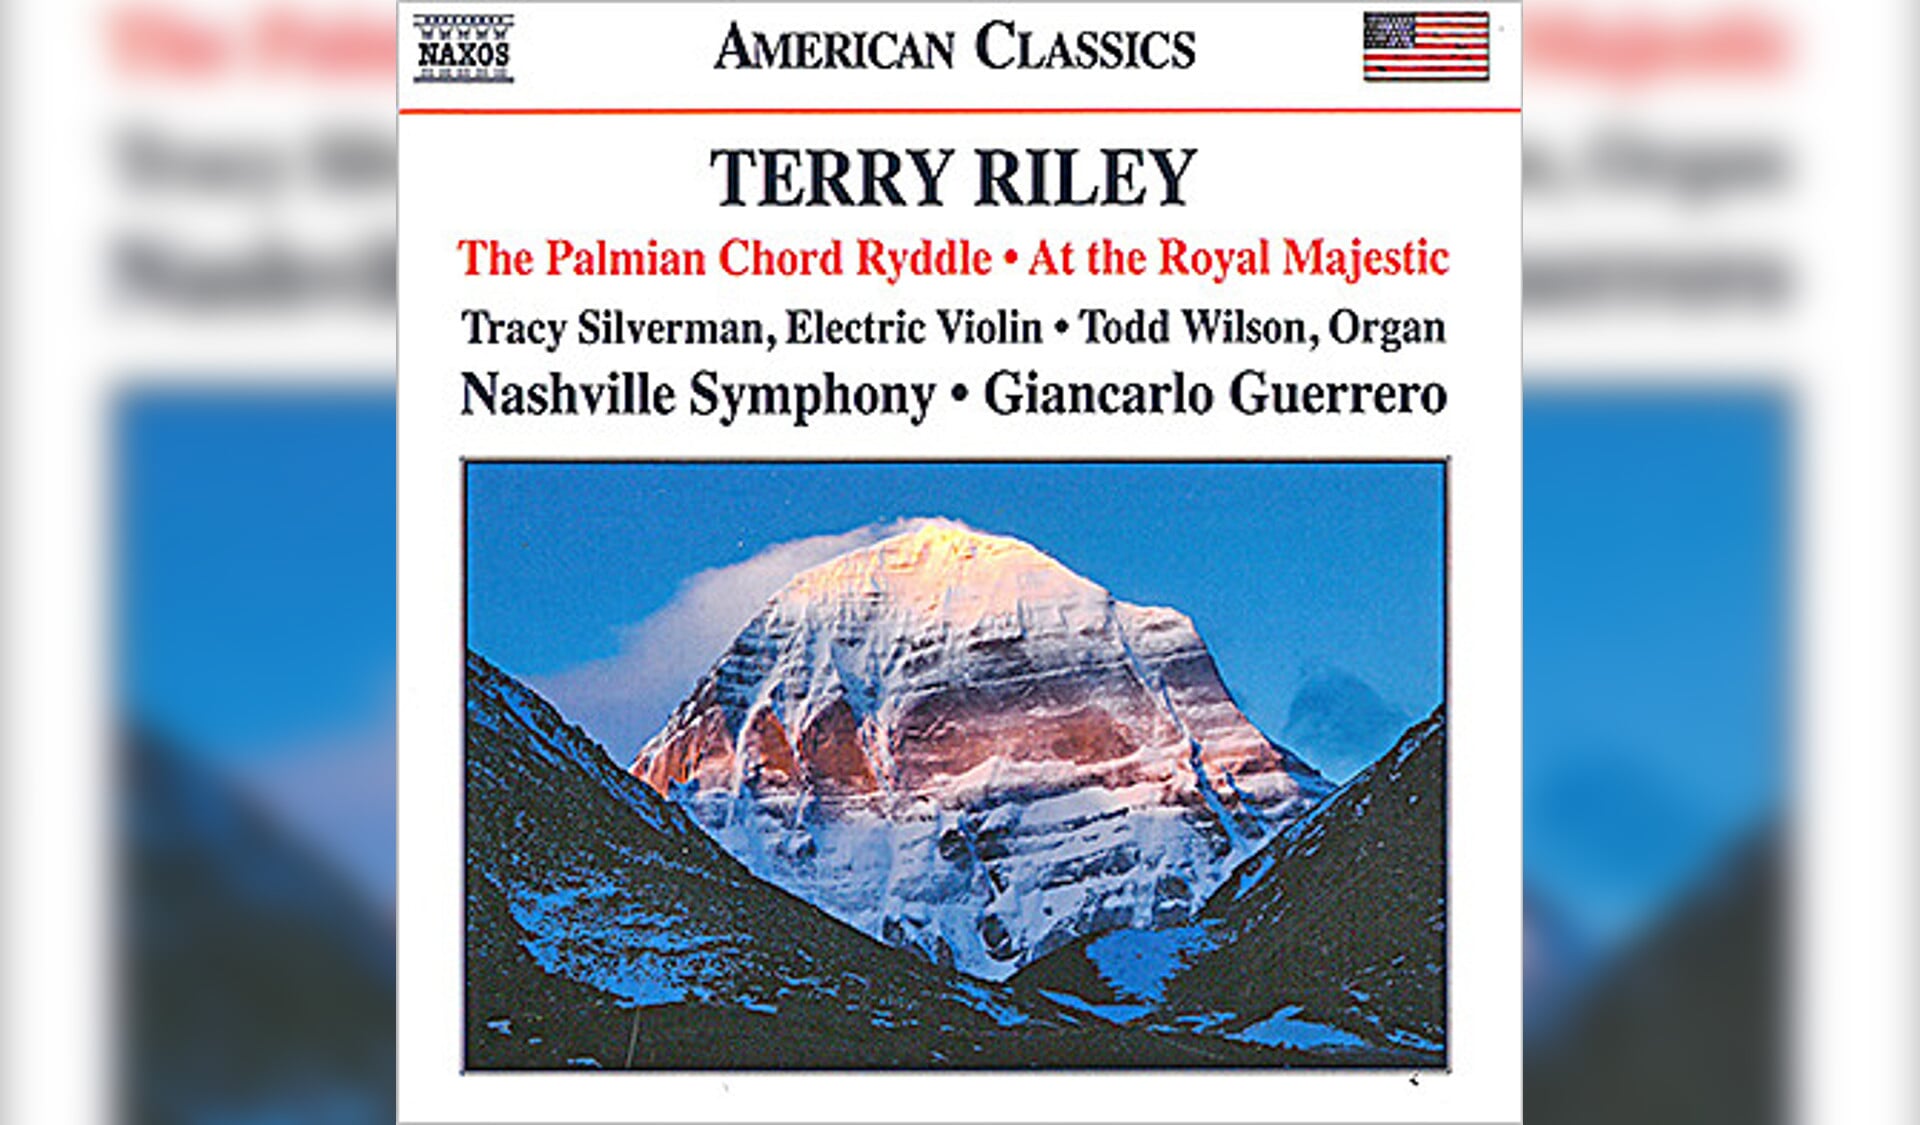 CD: Terry Riley - The Palmian Chord & At The Royal Majestic